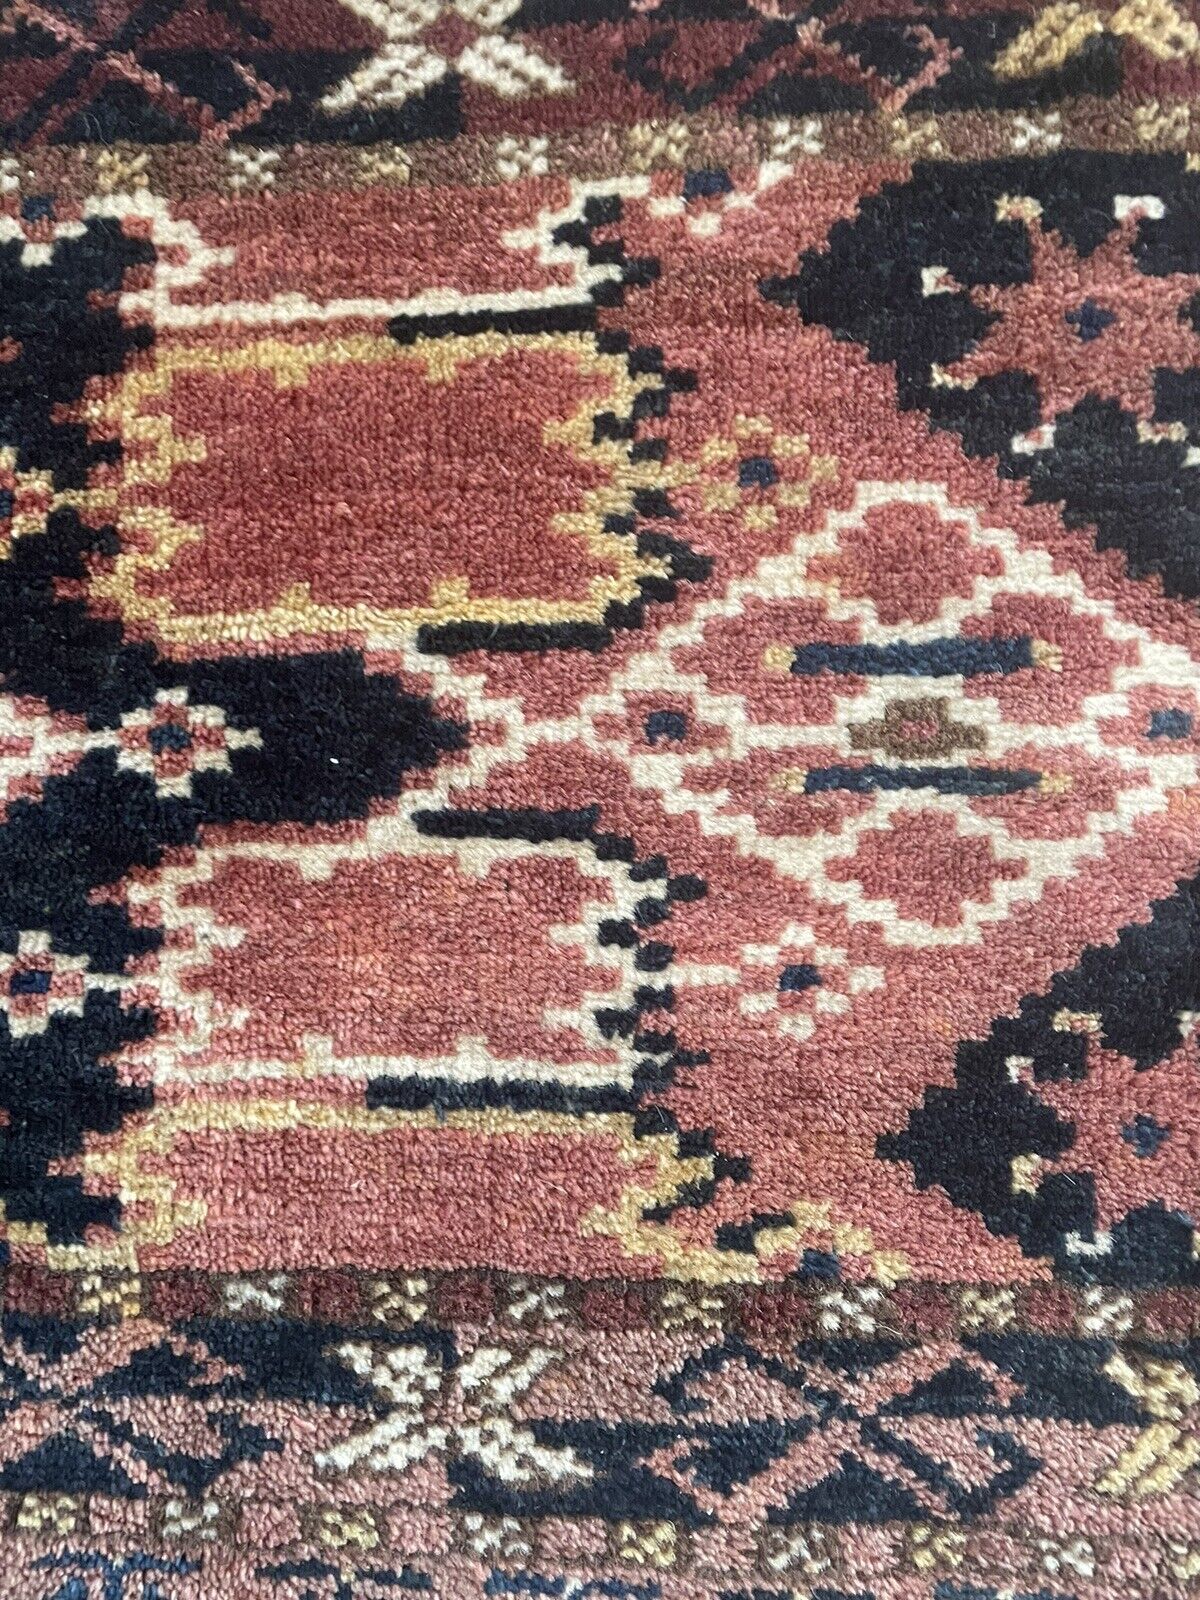 Close-up of craftsmanship on Handmade Antique Afghan Beshir Collectible Chuval Rug - Detailed view highlighting the skillful craftsmanship evident in the rug's design, despite signs of age wear.